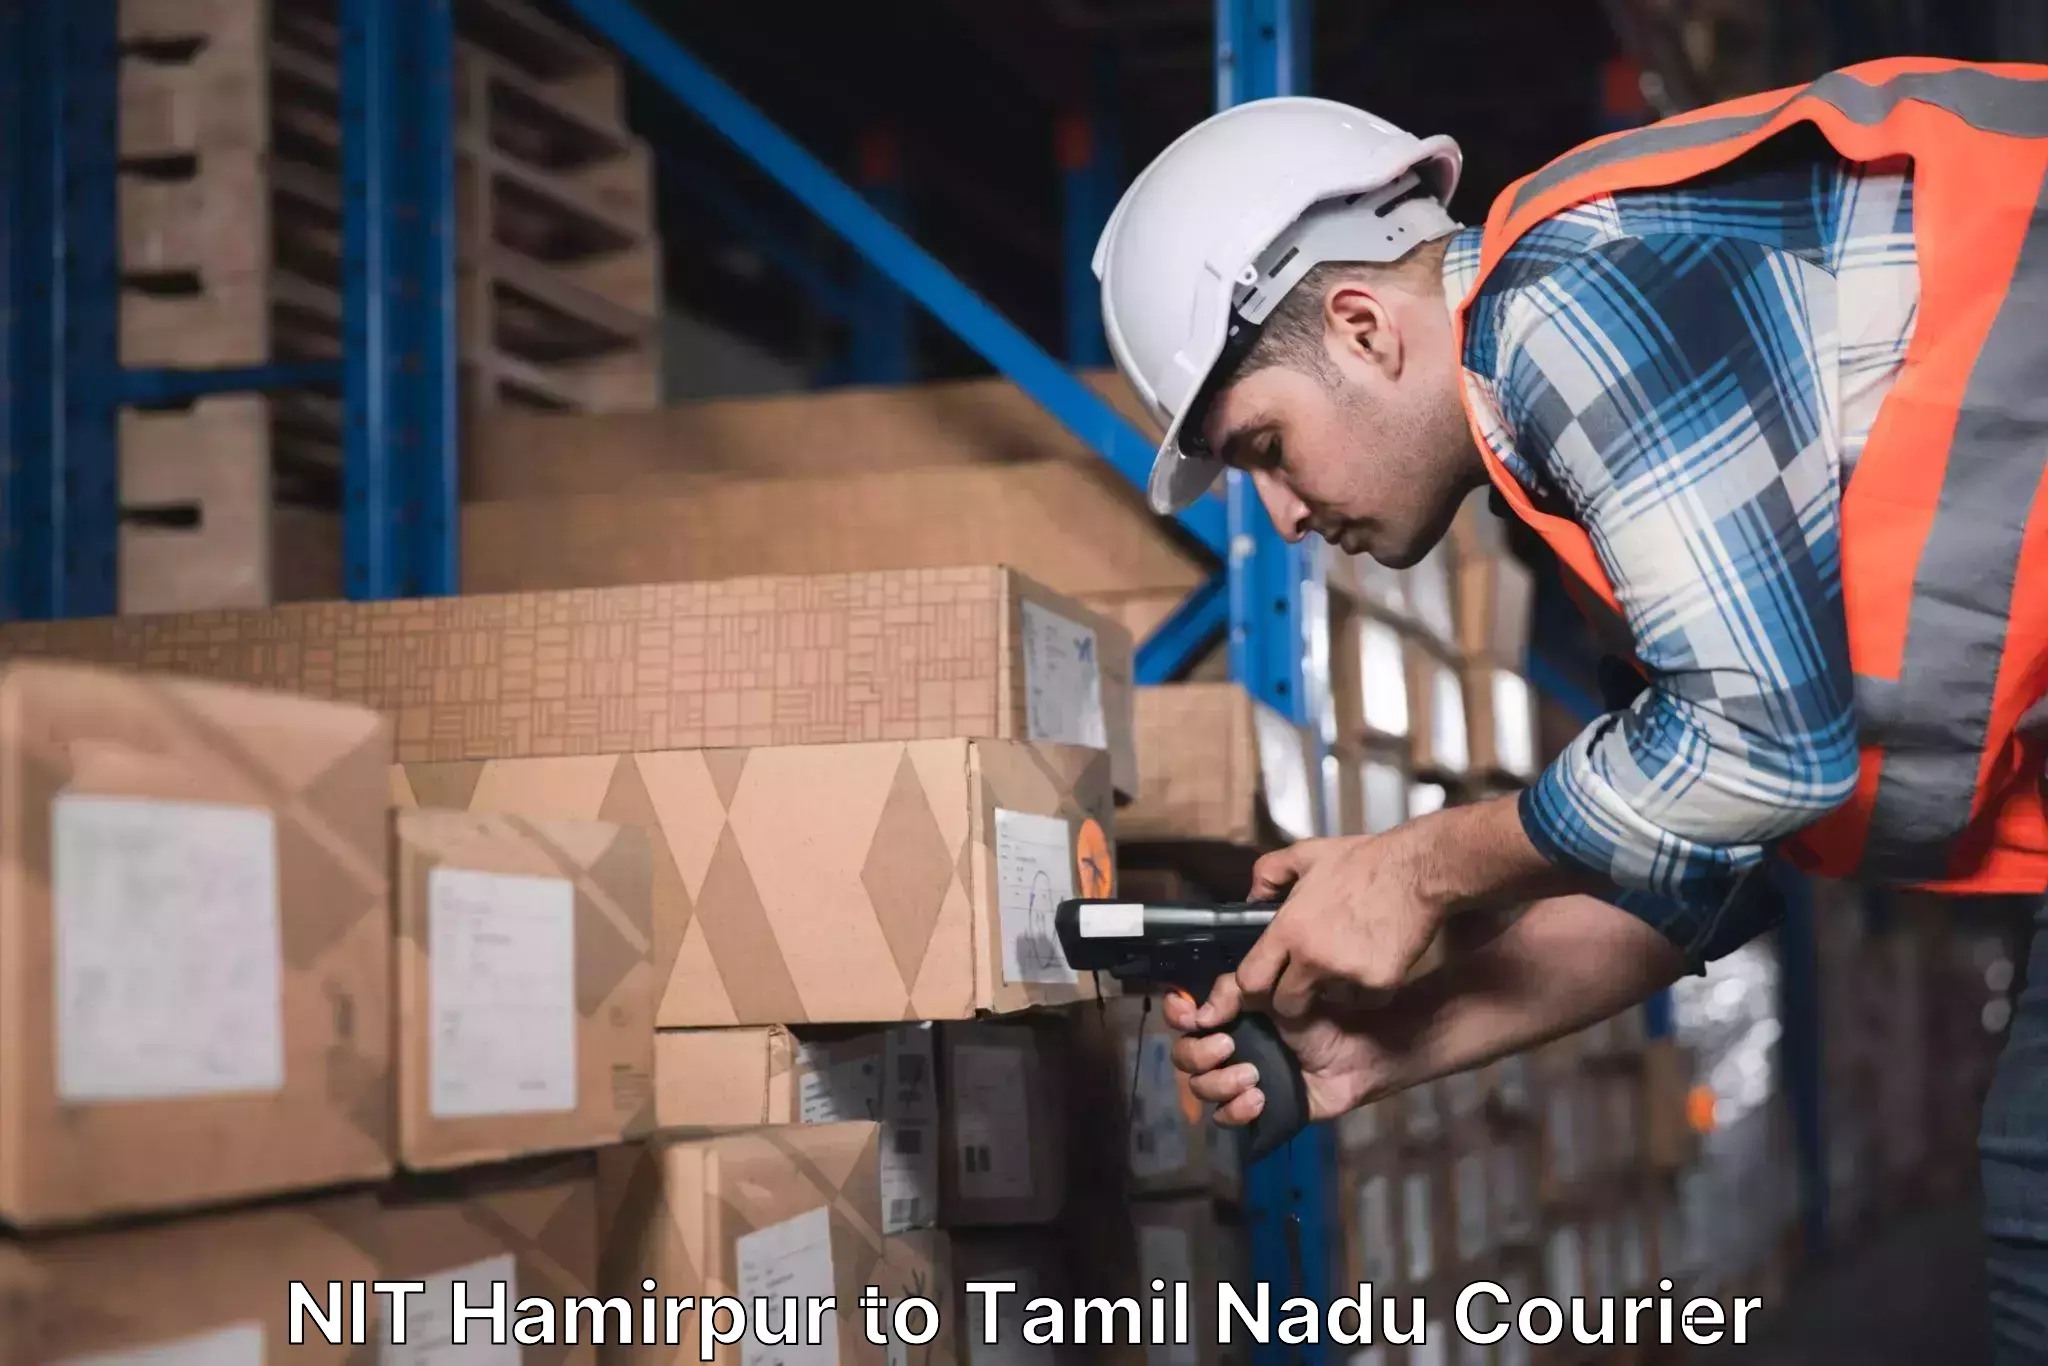 On-call courier service NIT Hamirpur to Tallakulam